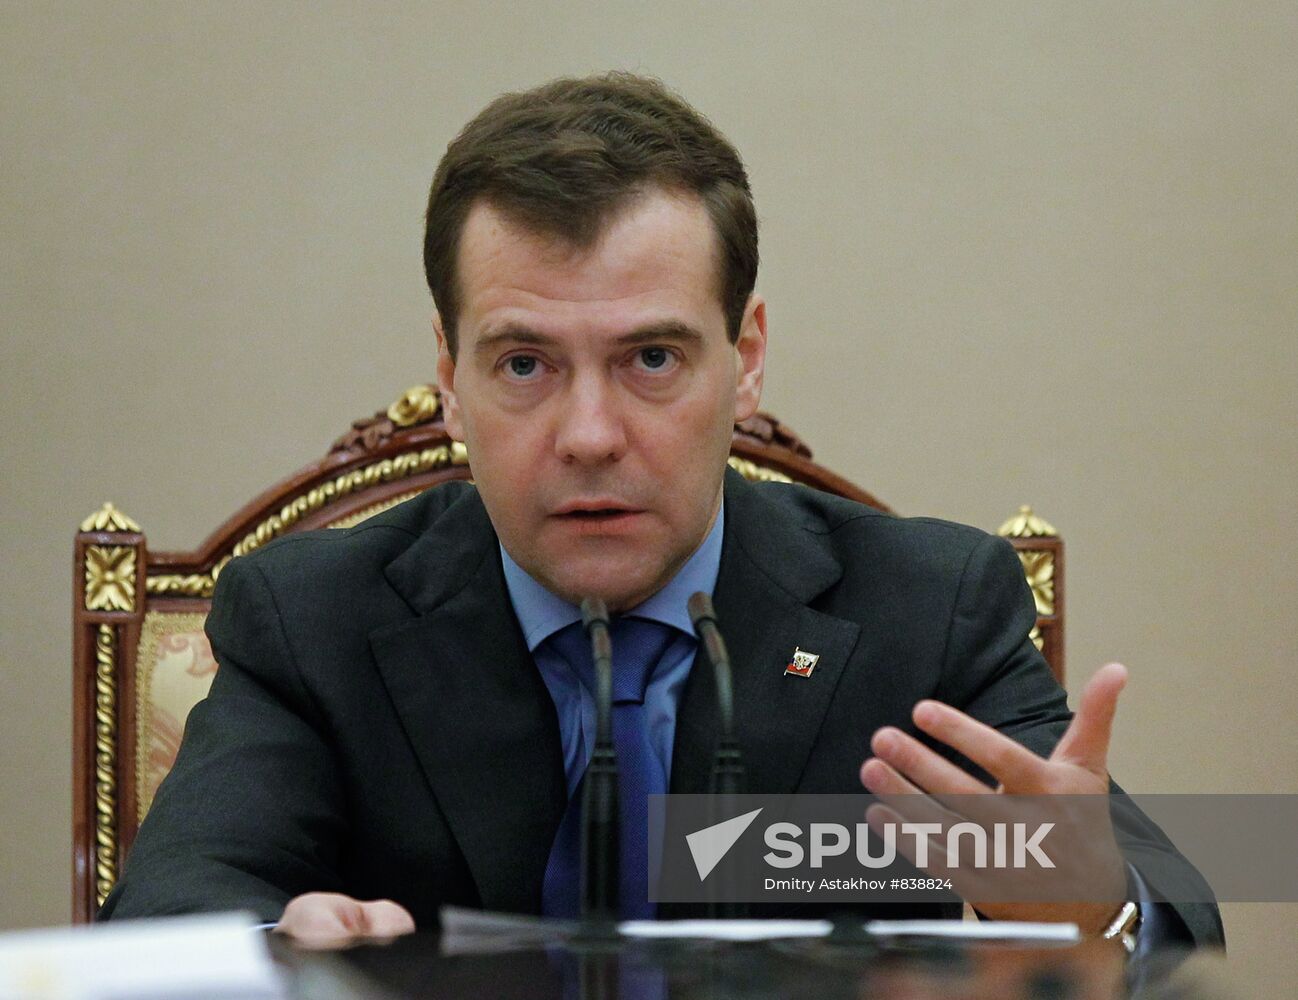 Dmitry Medvedev chairs Anti-Corruption Council meeting